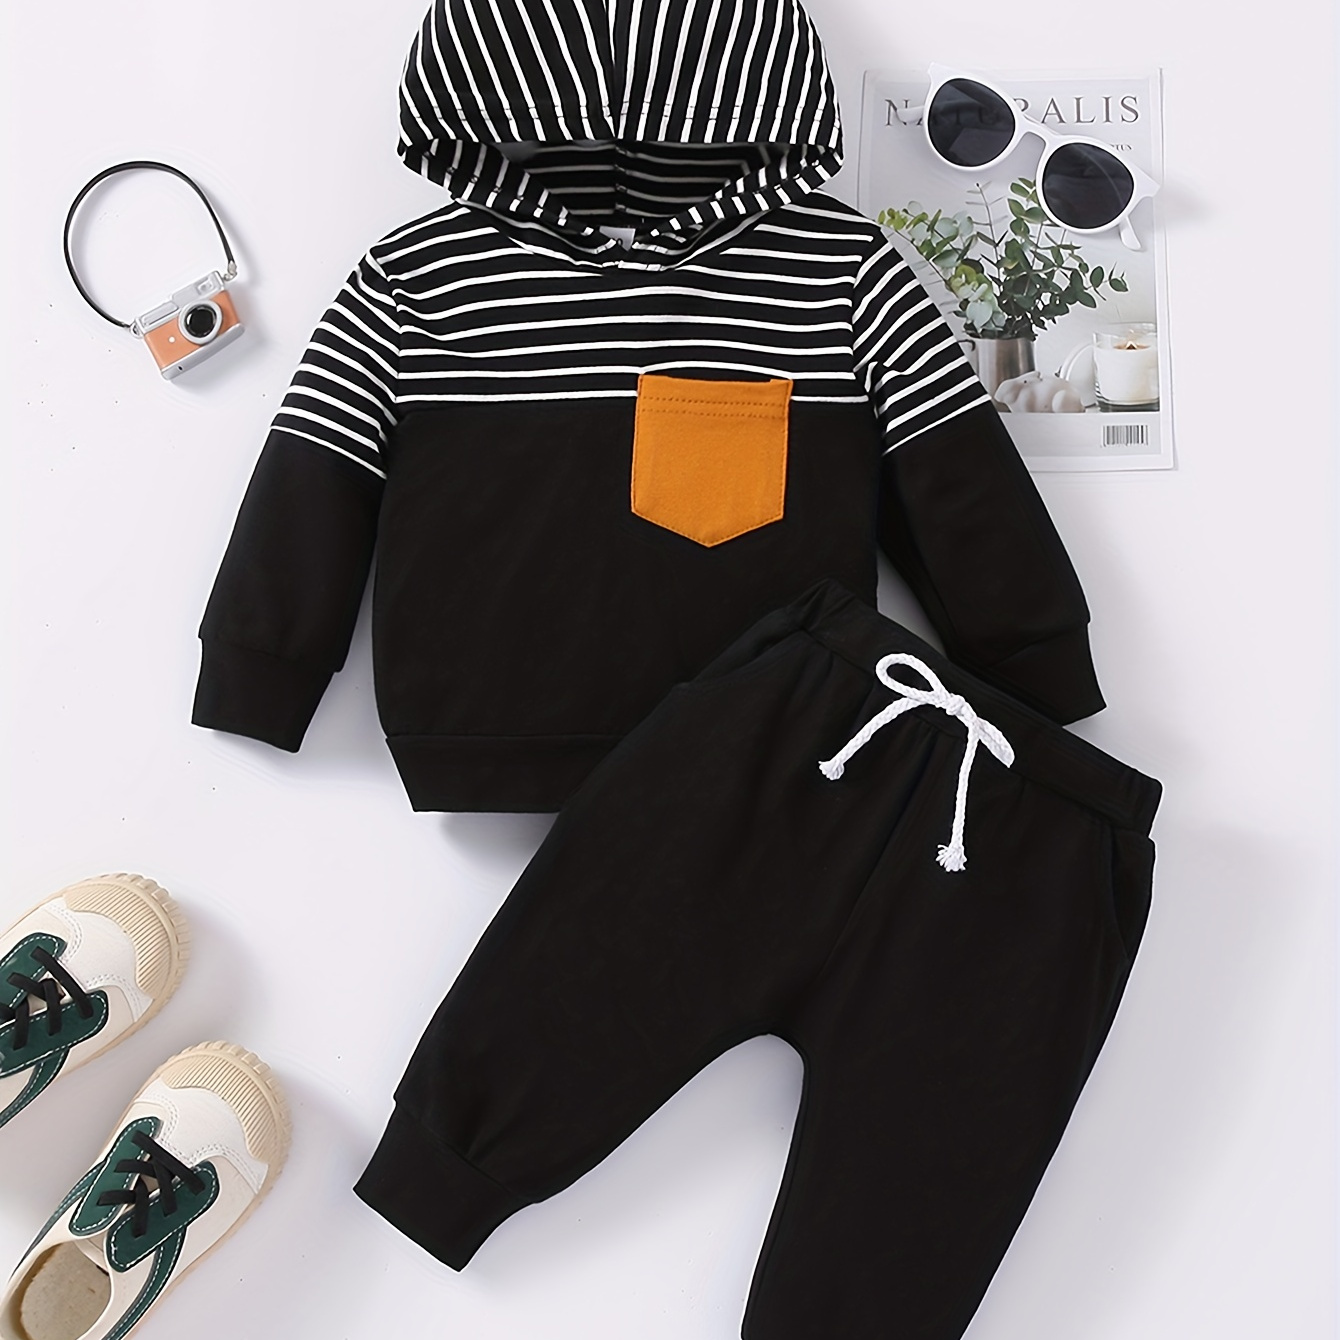 

Stripe Paneled Hoodie With Pocket, Hoodies For Baby Boys, Casual Sweatshirt Set, Long Sleeves Pullover Sweatshirt Top Trousers 2pcs Outfit